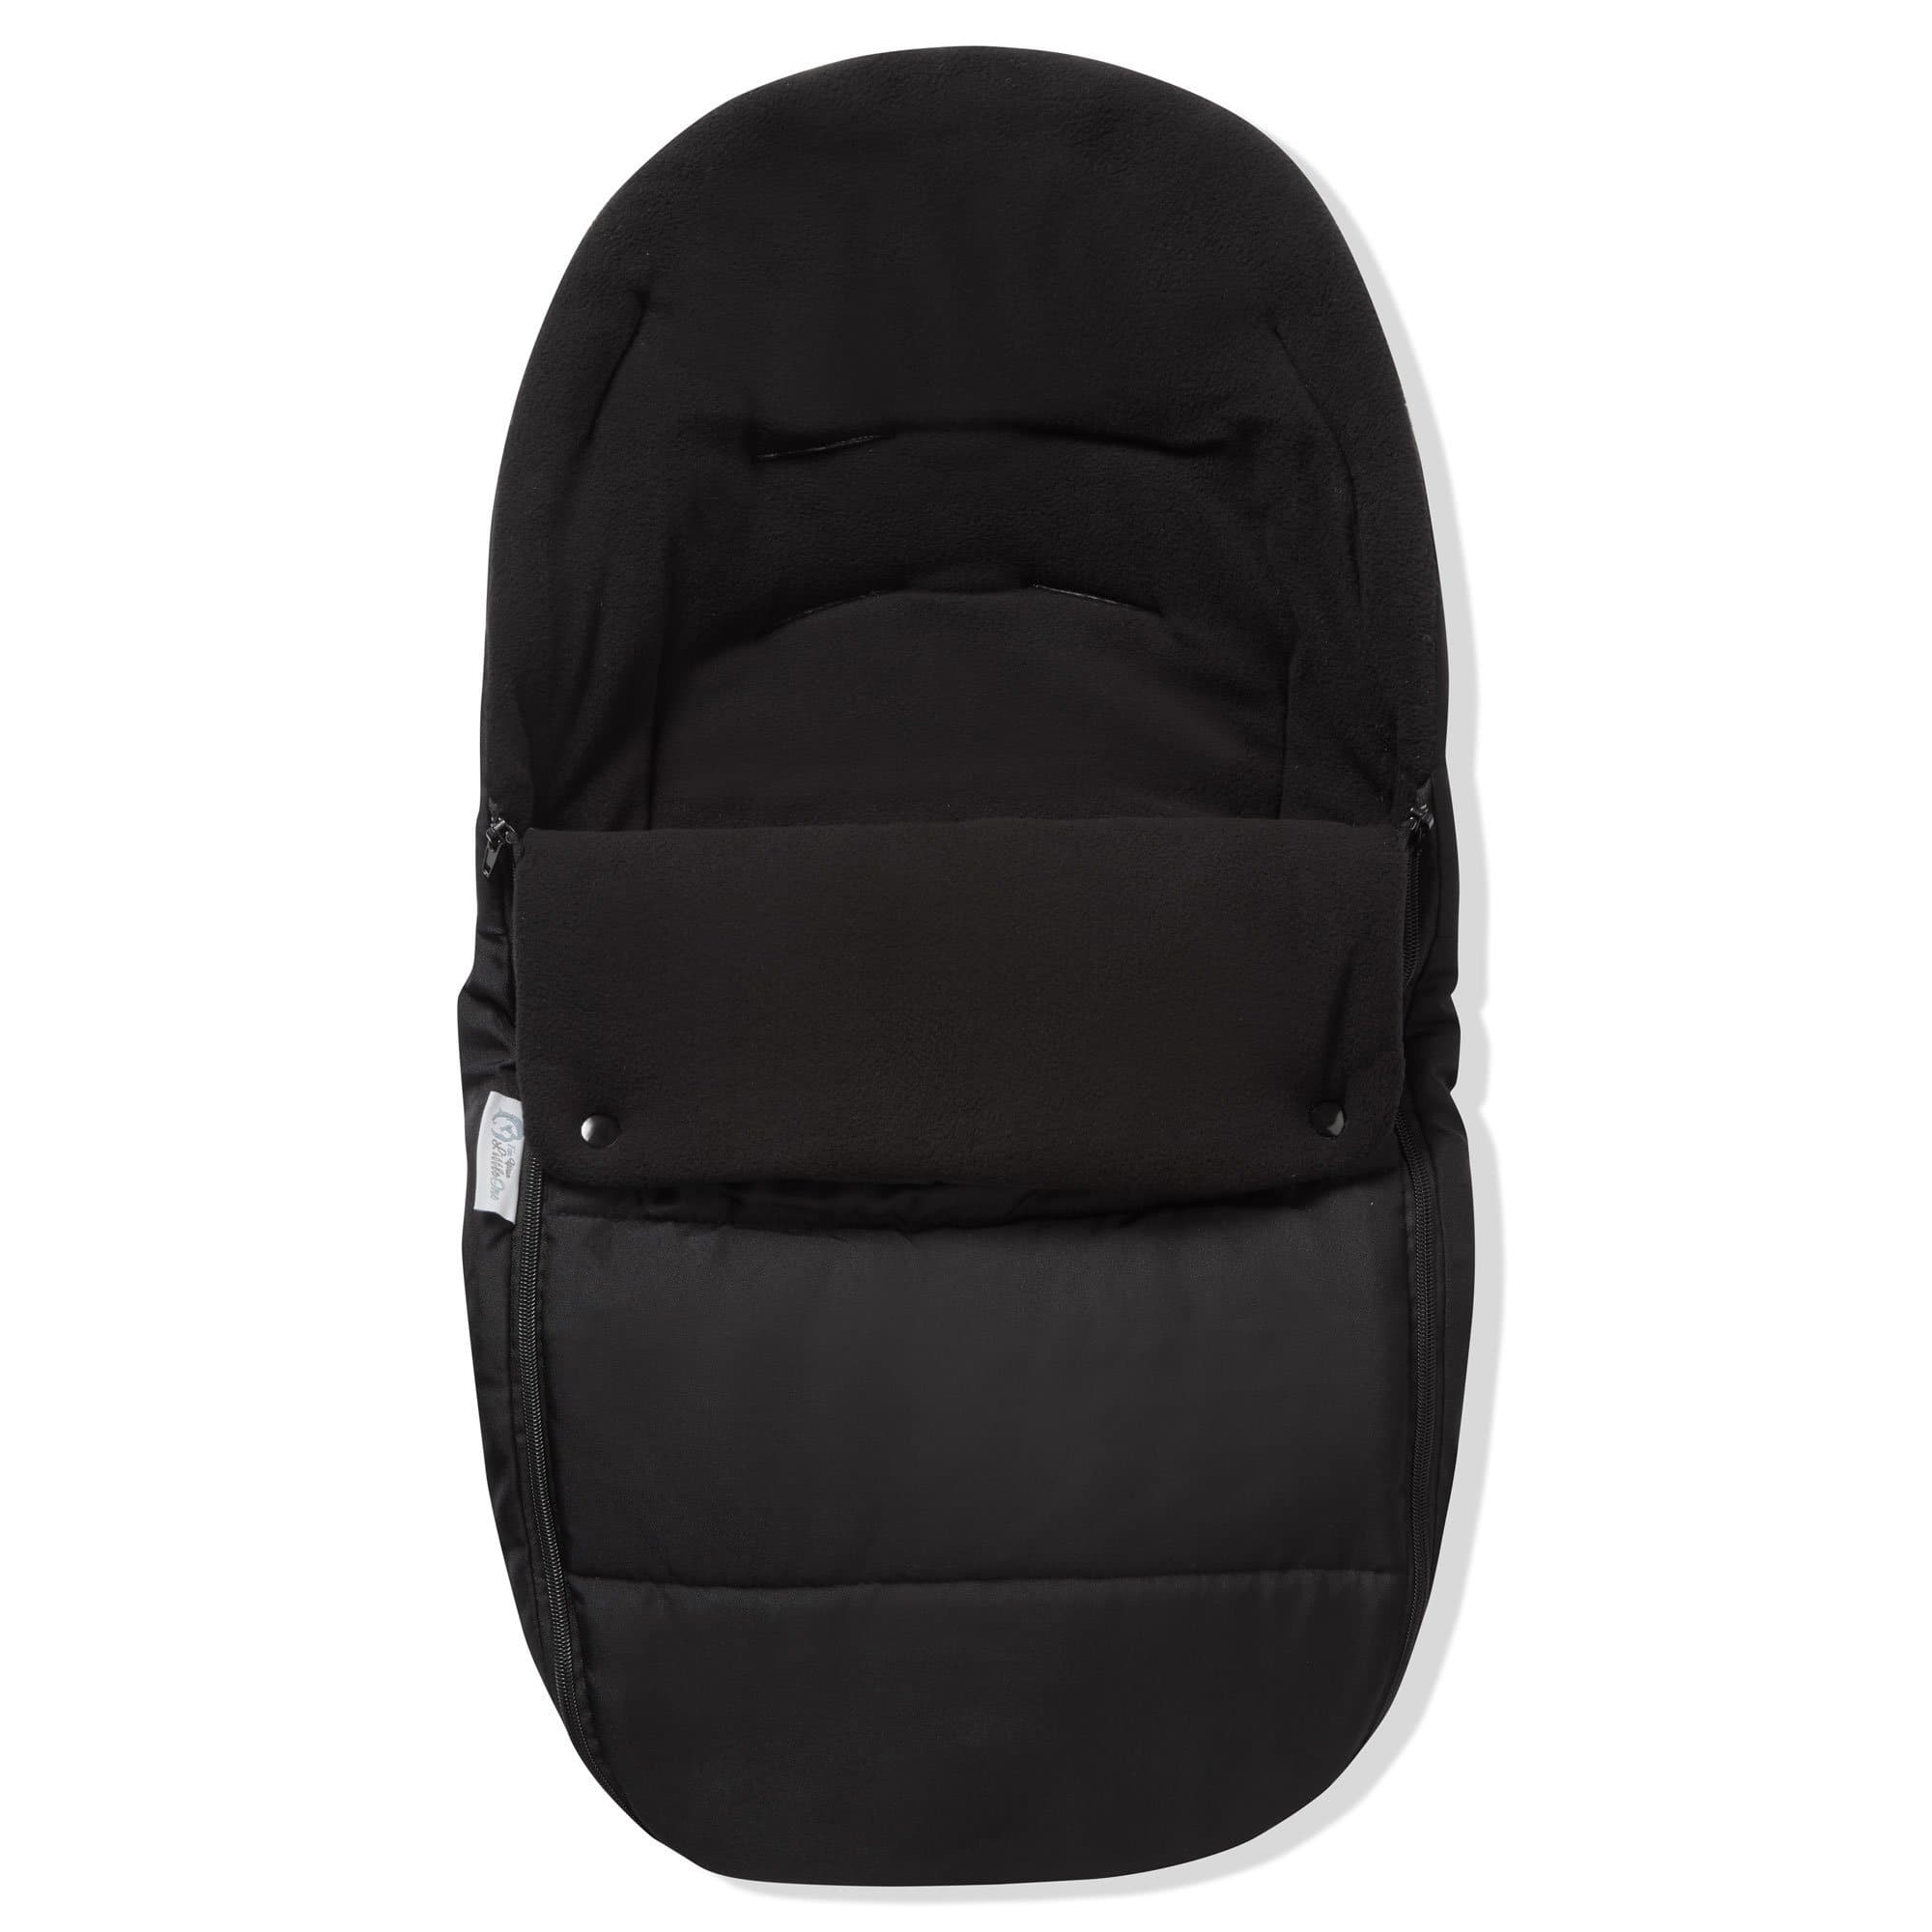 Premium Car Seat Footmuff / Cosy Toes Compatible With My Babiie - Black Jack / Fits All Models | For Your Little One